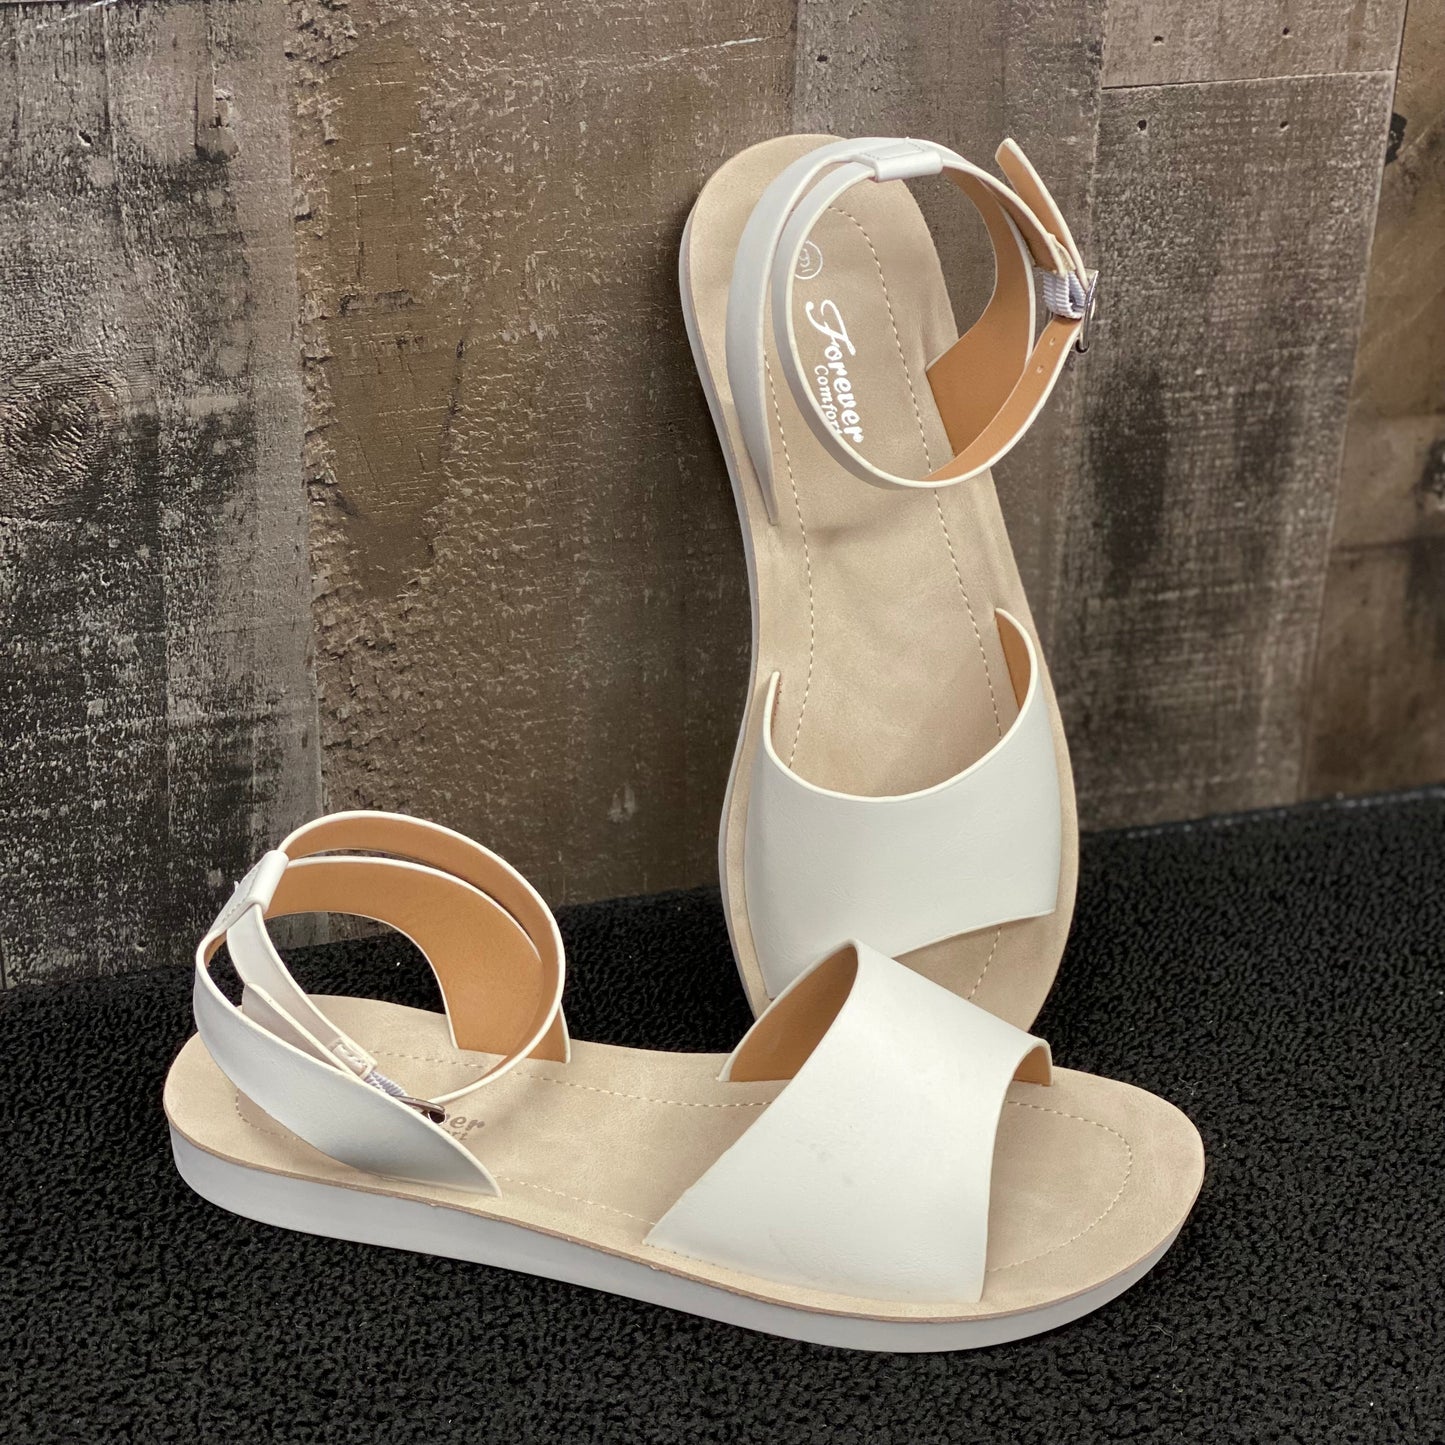 The Perfect Addition Sandal in White